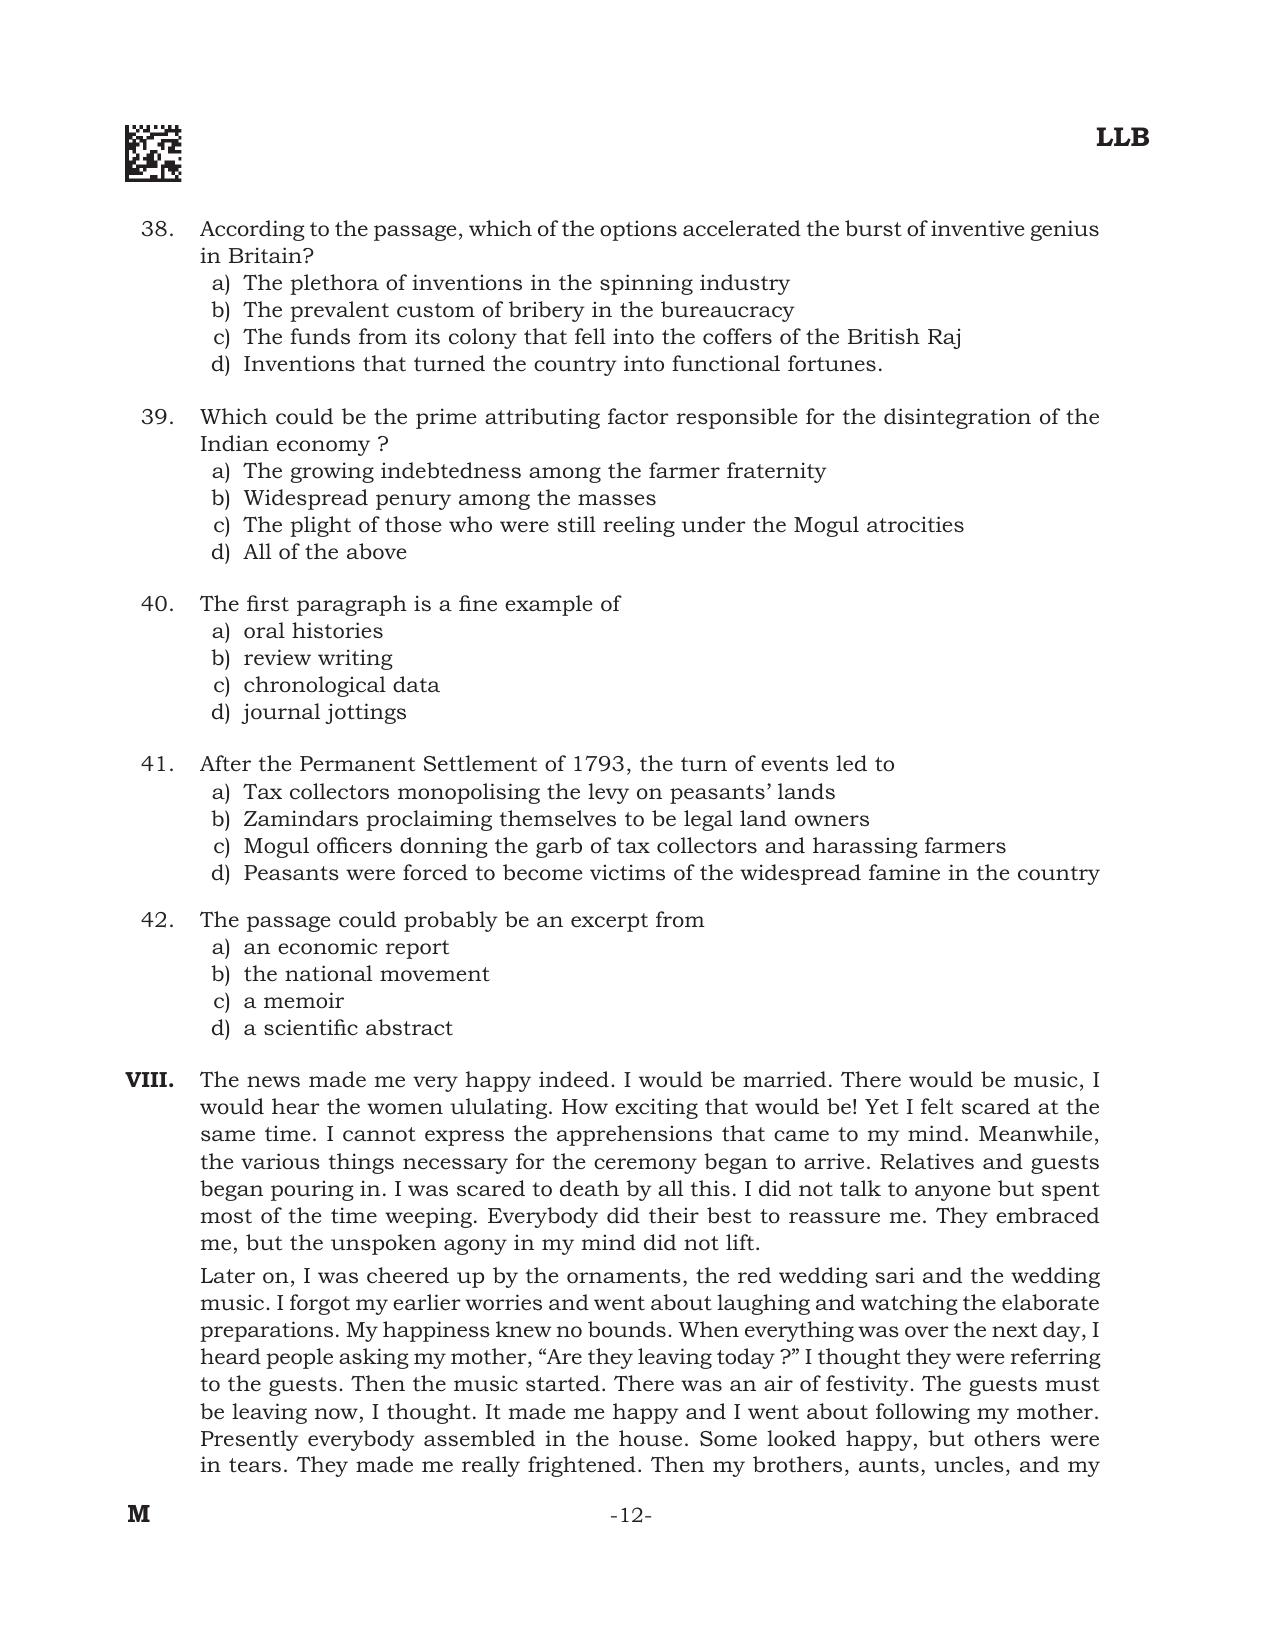 AILET 2022 Question Paper for BA LLB - Page 12